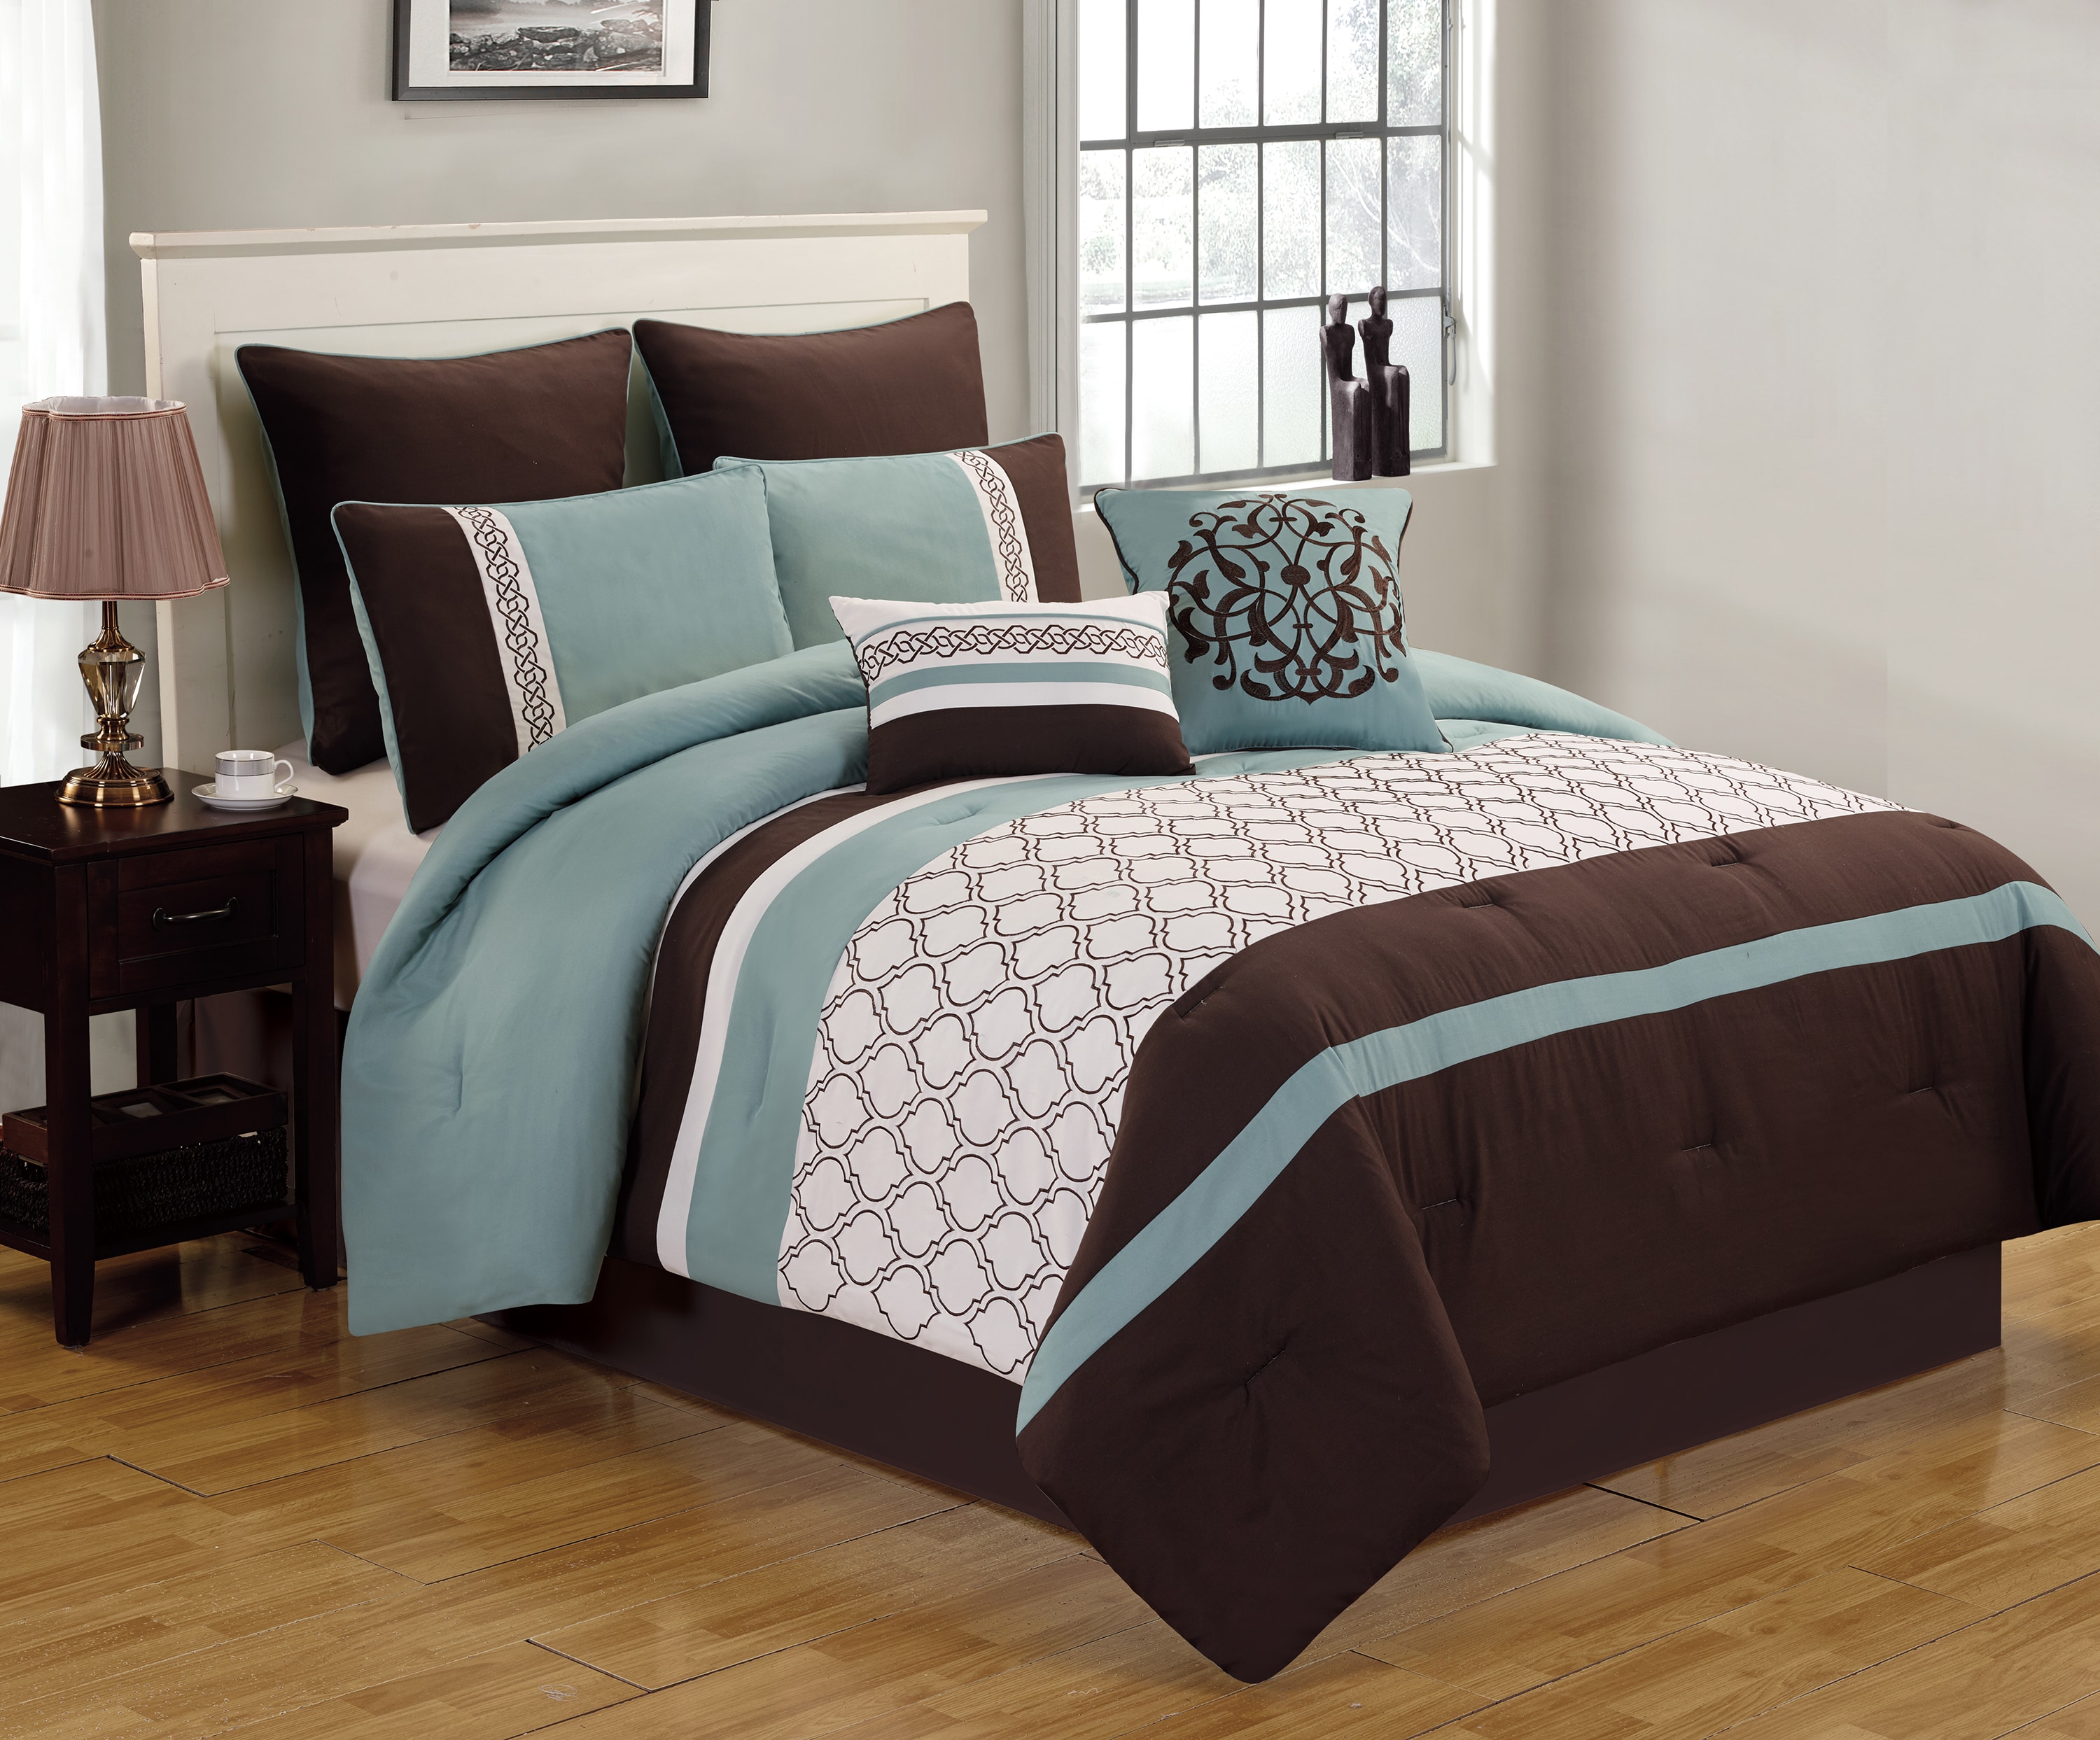 Riverbrook Home Modern/Contemporary Bedding Sets at Lowes.com